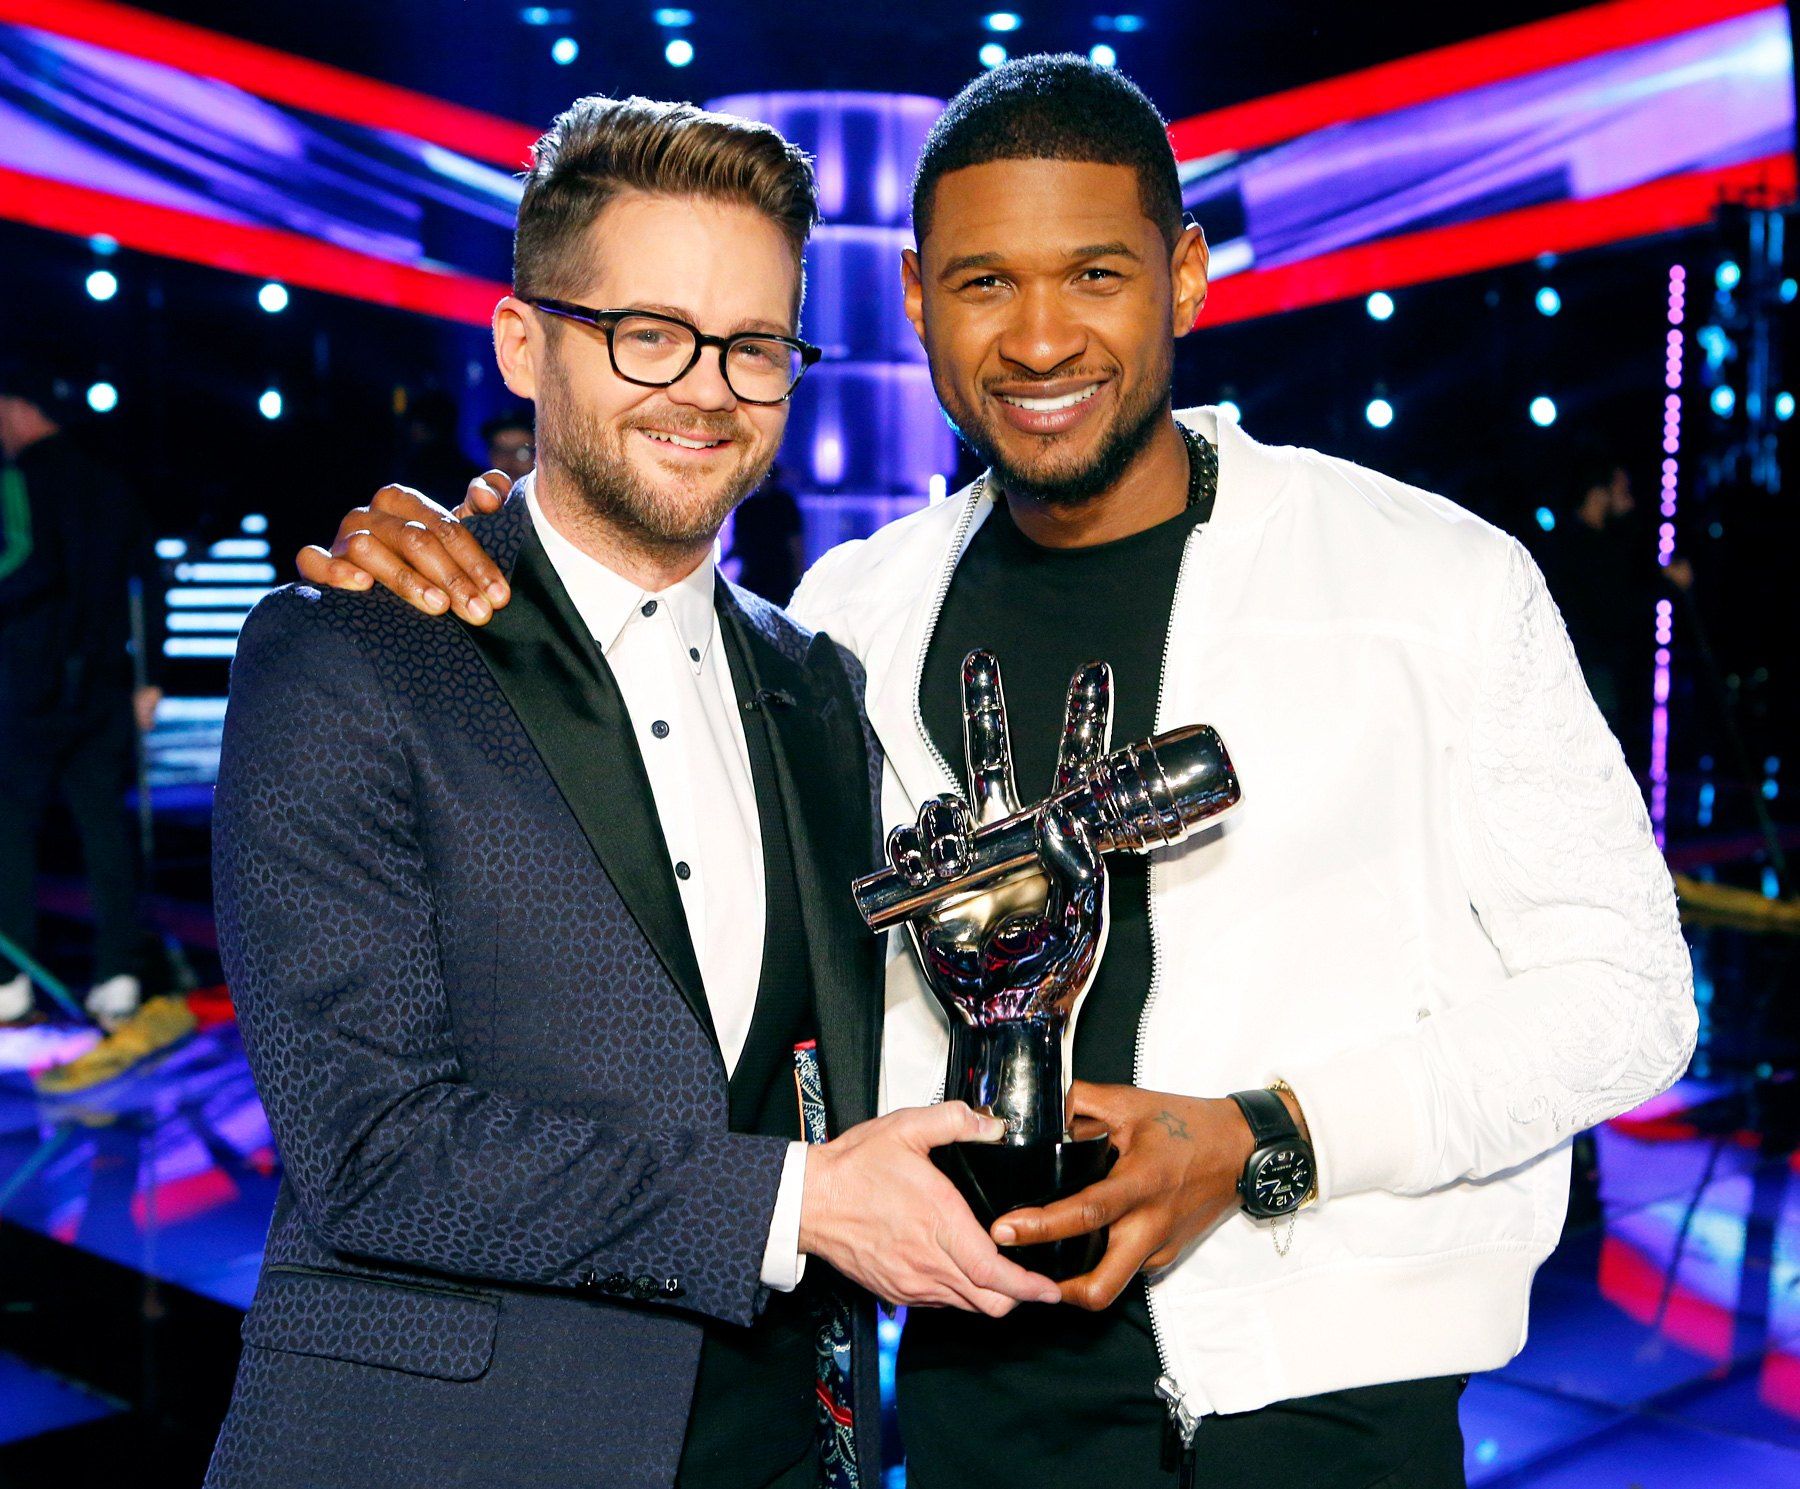 Josh Kaufman and Usher holding The Voice Trophy